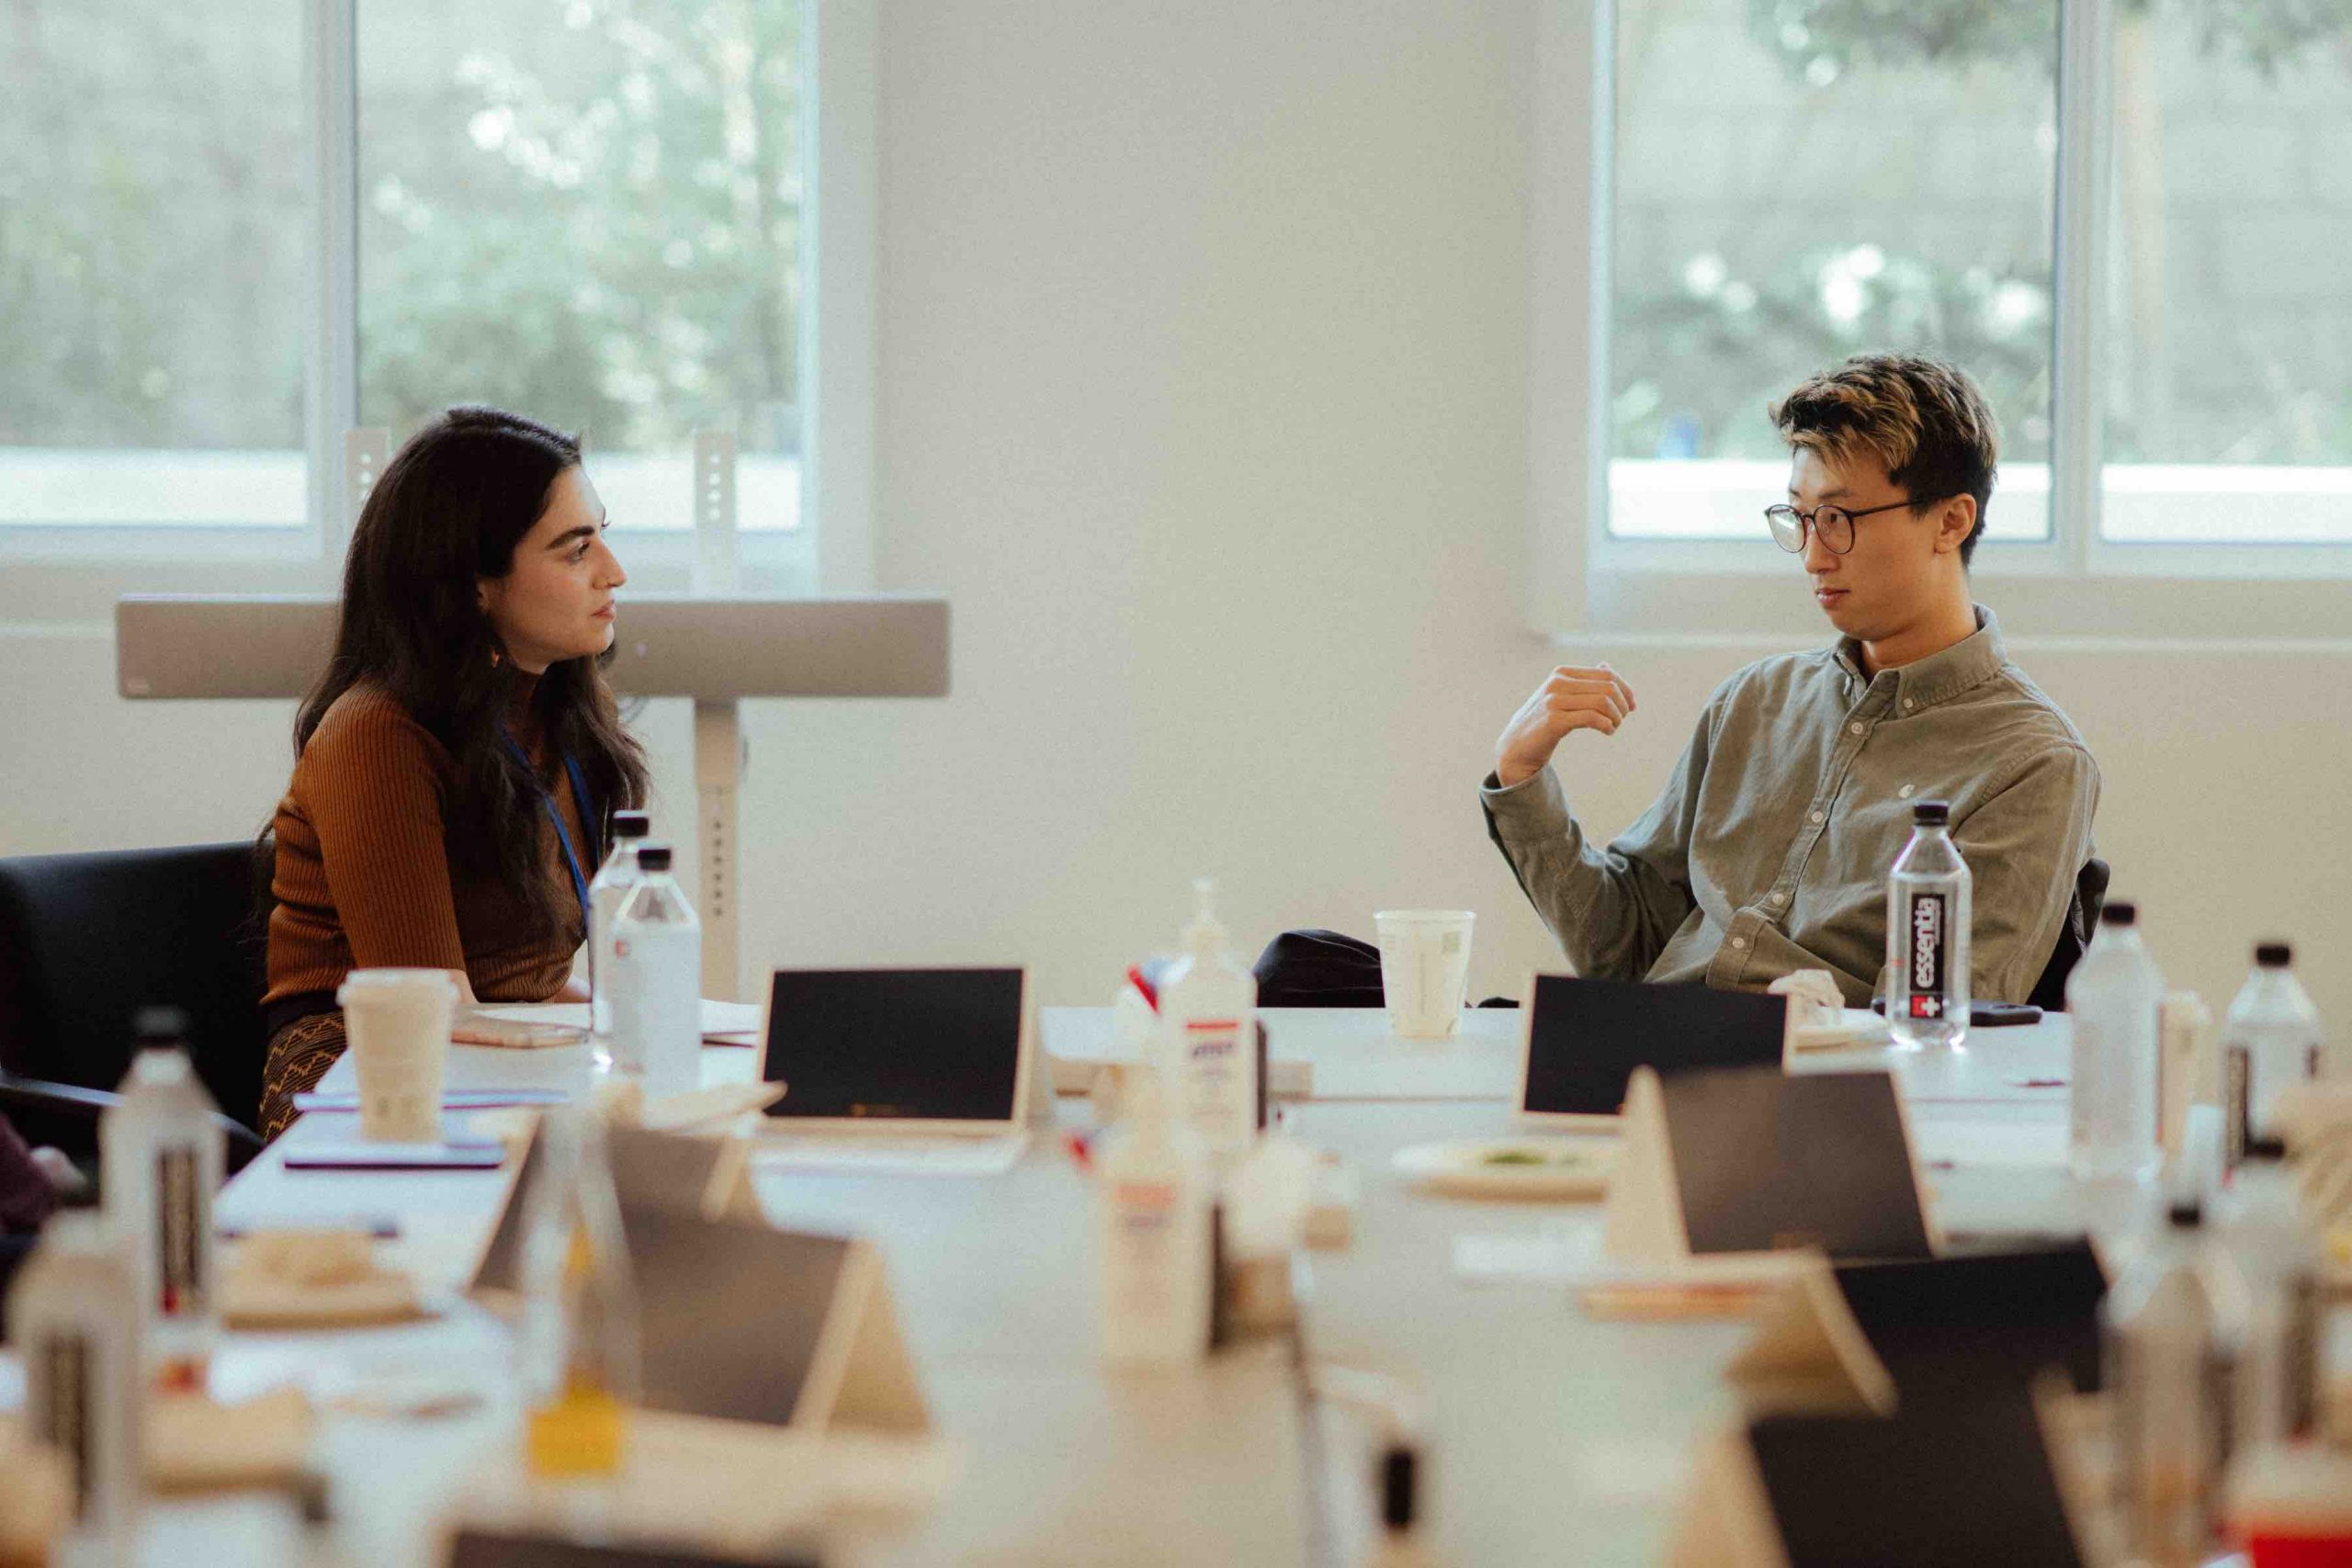 At the head of a conference table, Pillars Managing Director of Culture Change Arij Mikati looks thoughtfully at Bing Liu who has his right arm up in conversation